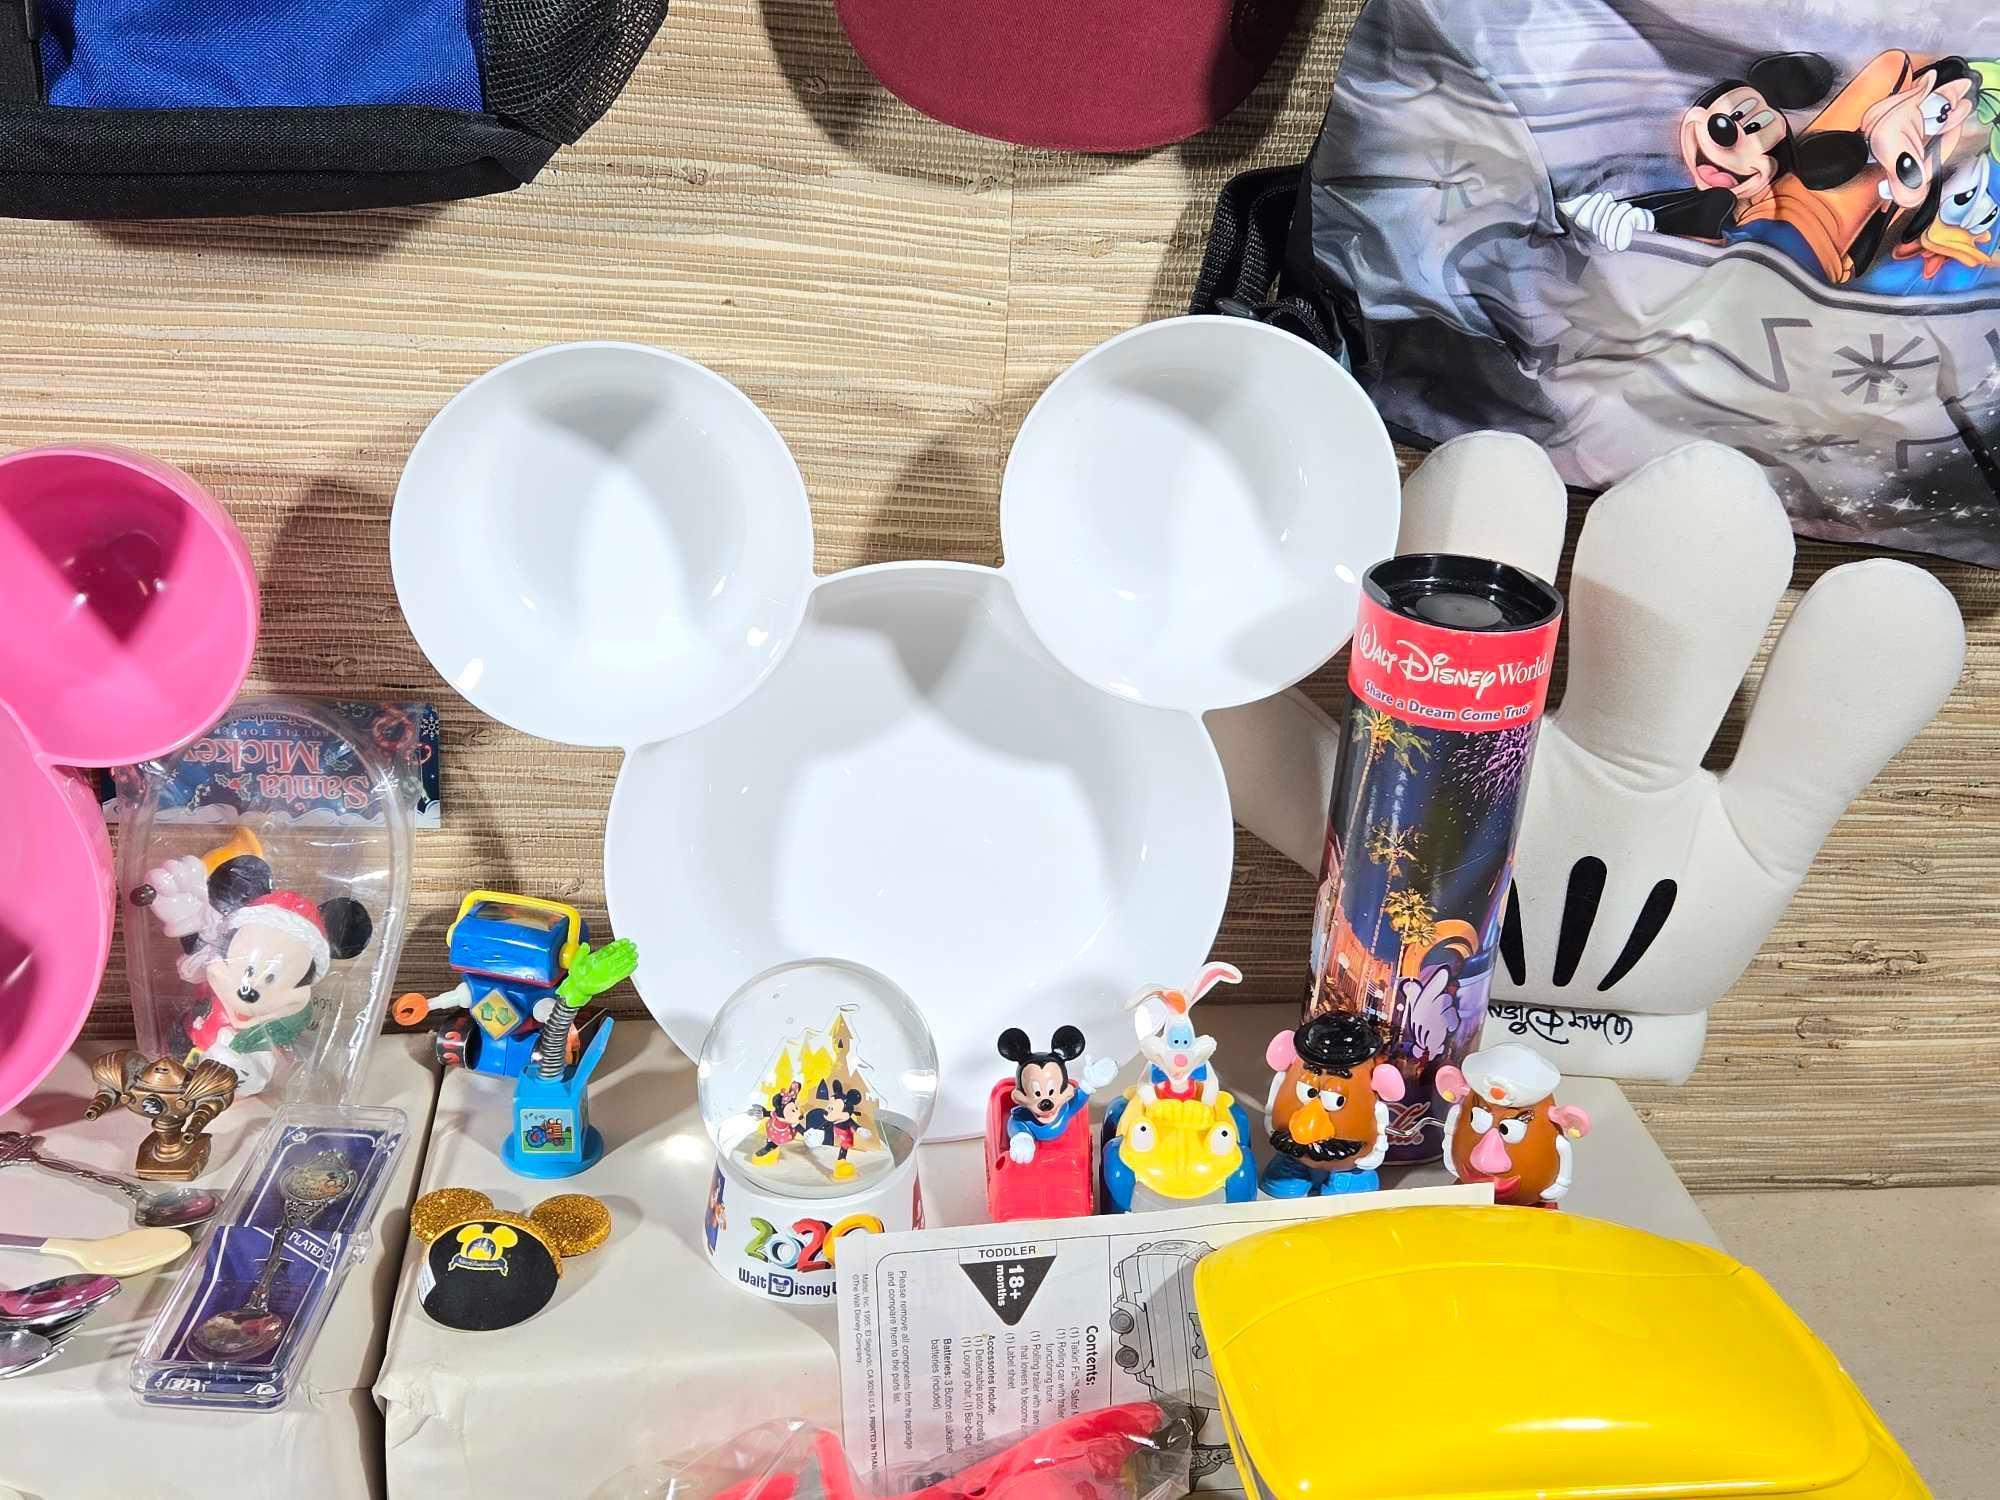 Large Collection of Disney Items